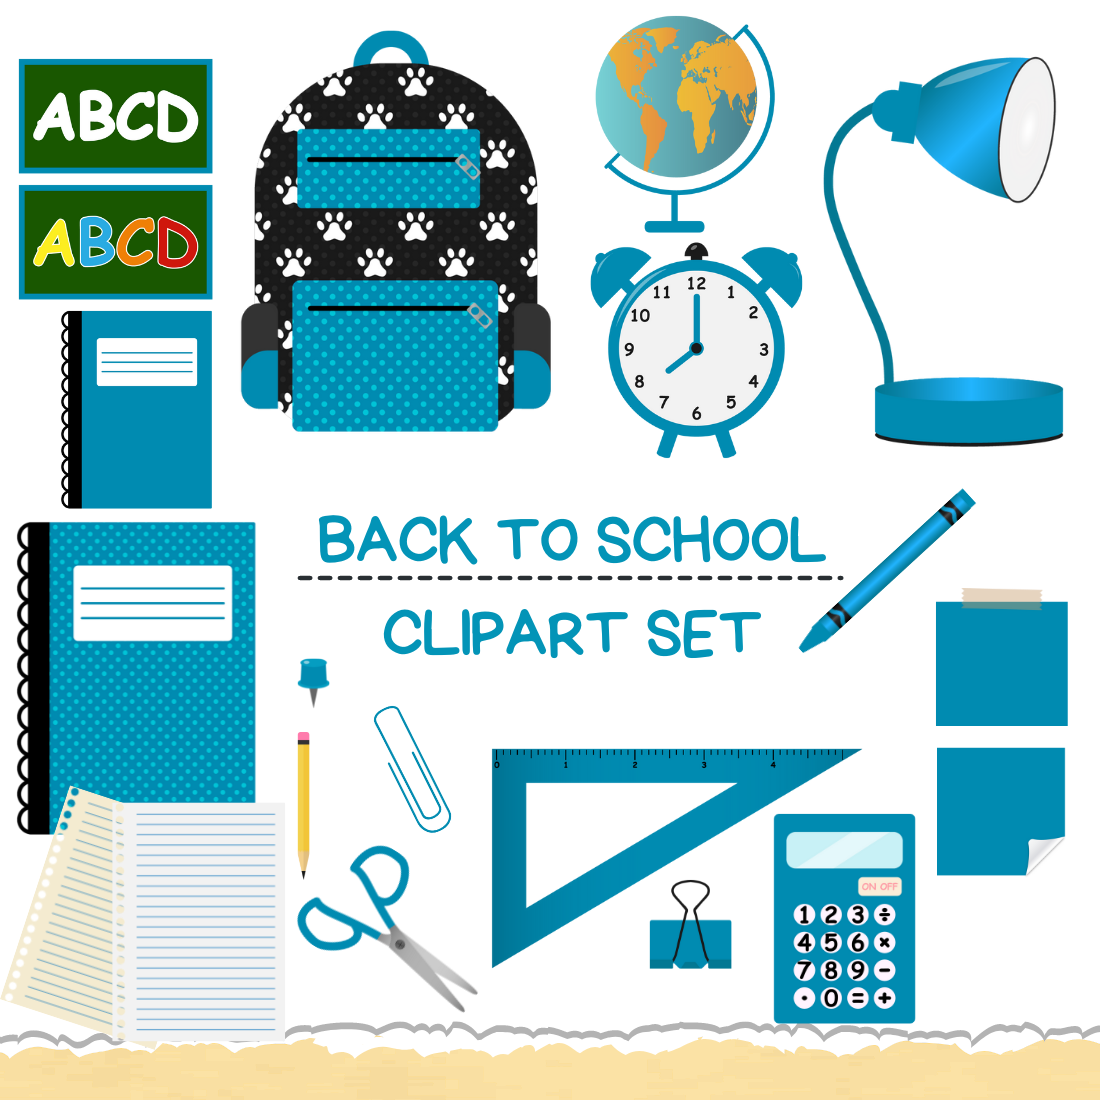 Turquoise Back To School Clipart Set cover image.